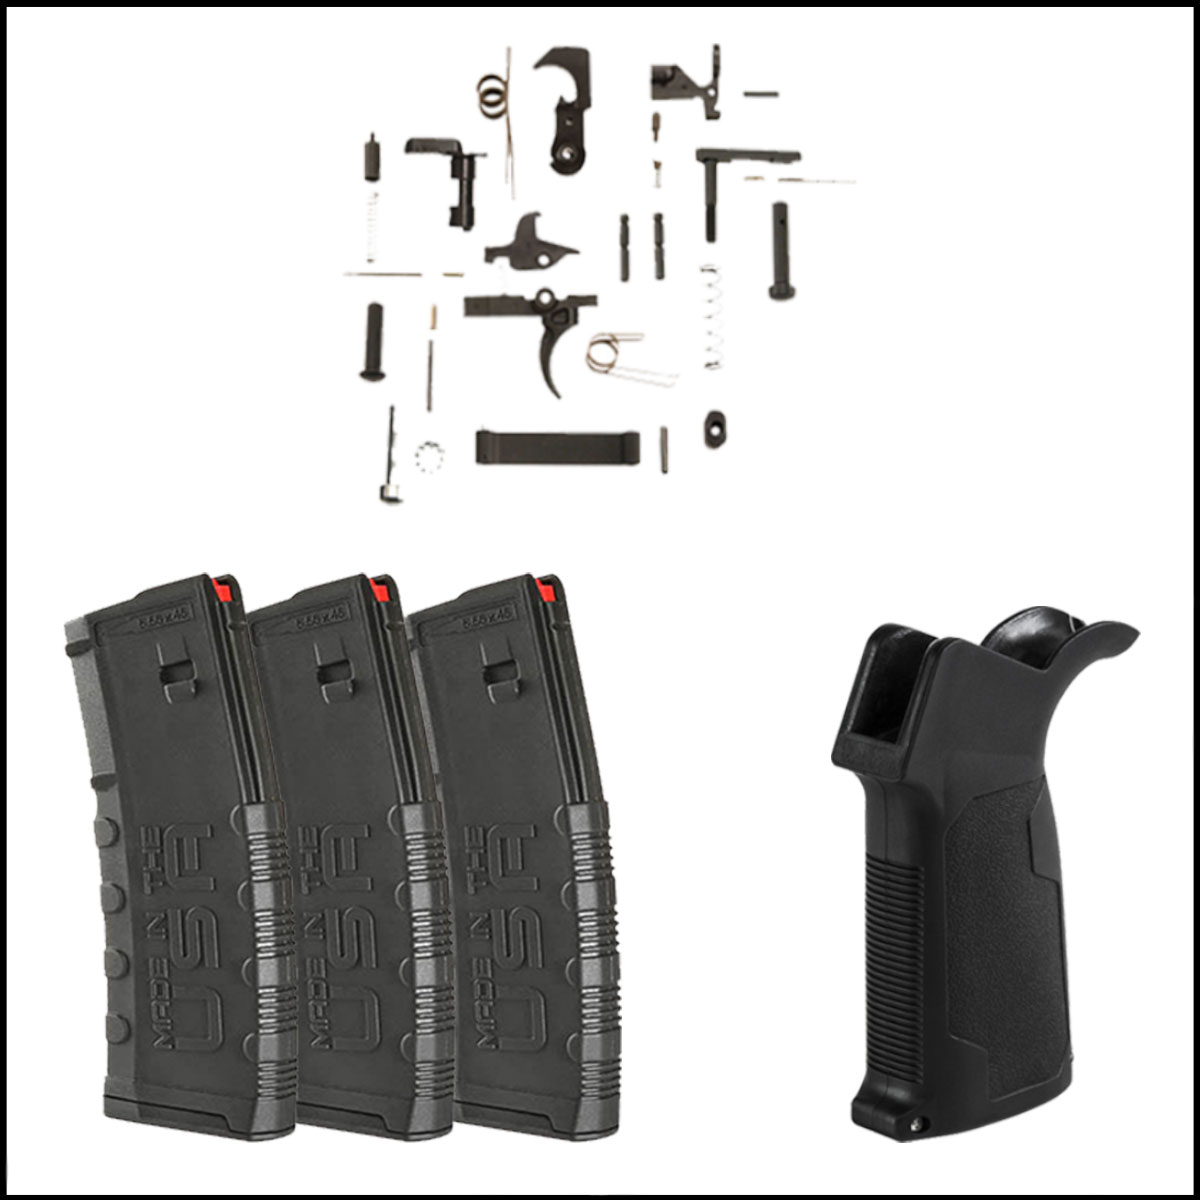 Lower Starting Kits: Amend2 AR-15 30Rd, 3-Pack + Recoil Technologies AR-15 Lower Parts Kit + VISM AR-15 Pistol Grip W/ Bottom Storage Compartment